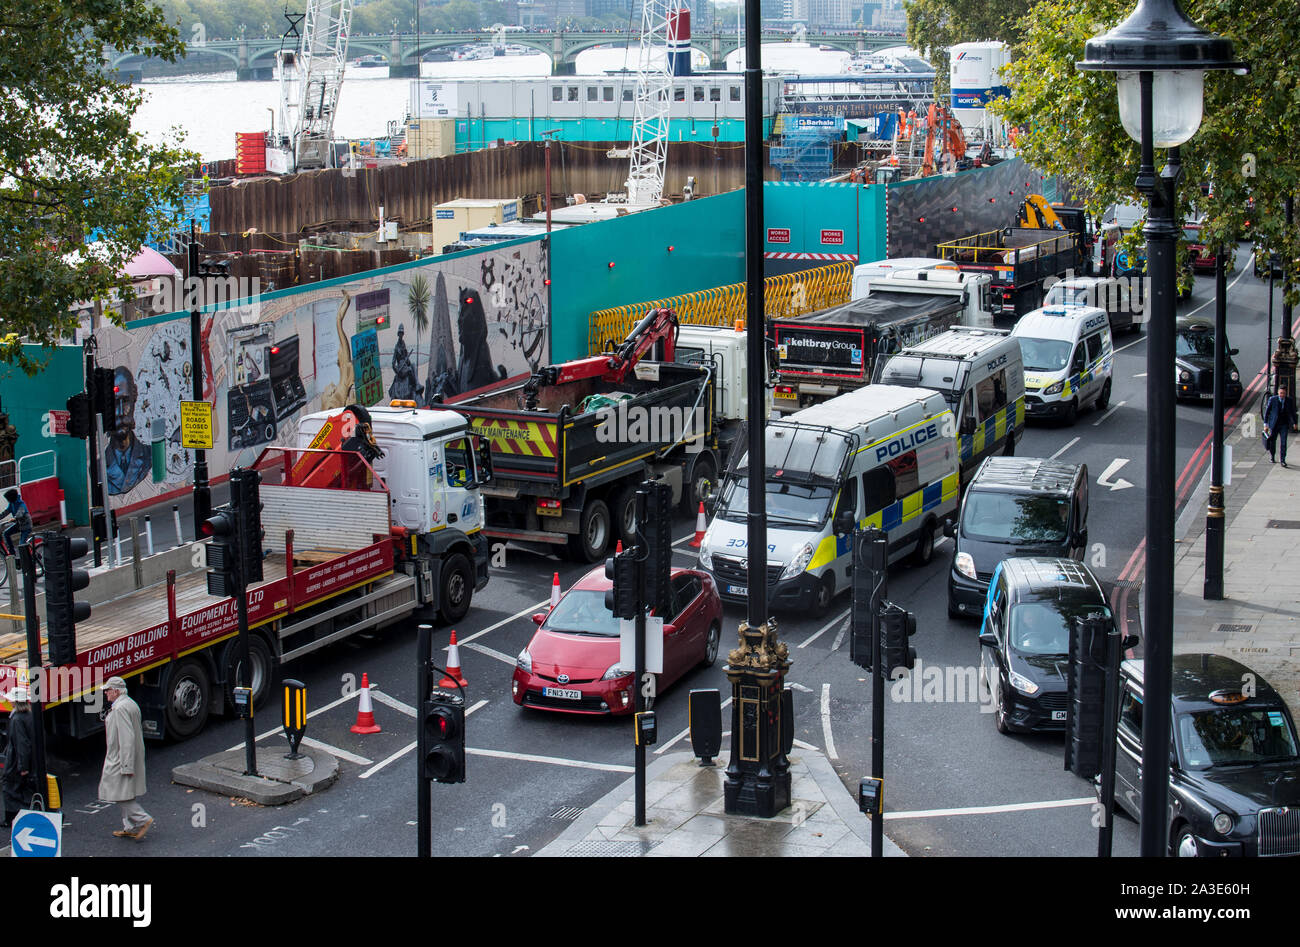 Westminster Bridge, London UK. 7th October 2019. Roads around Westminster were jammed this morning as Extinction rebellion climate change activists gathered on Westminster bridge creating traffic disruption on major roads in the area. Celia McMahon/Alamy Live News. Credit: Celia McMahon/Alamy Live News Stock Photo